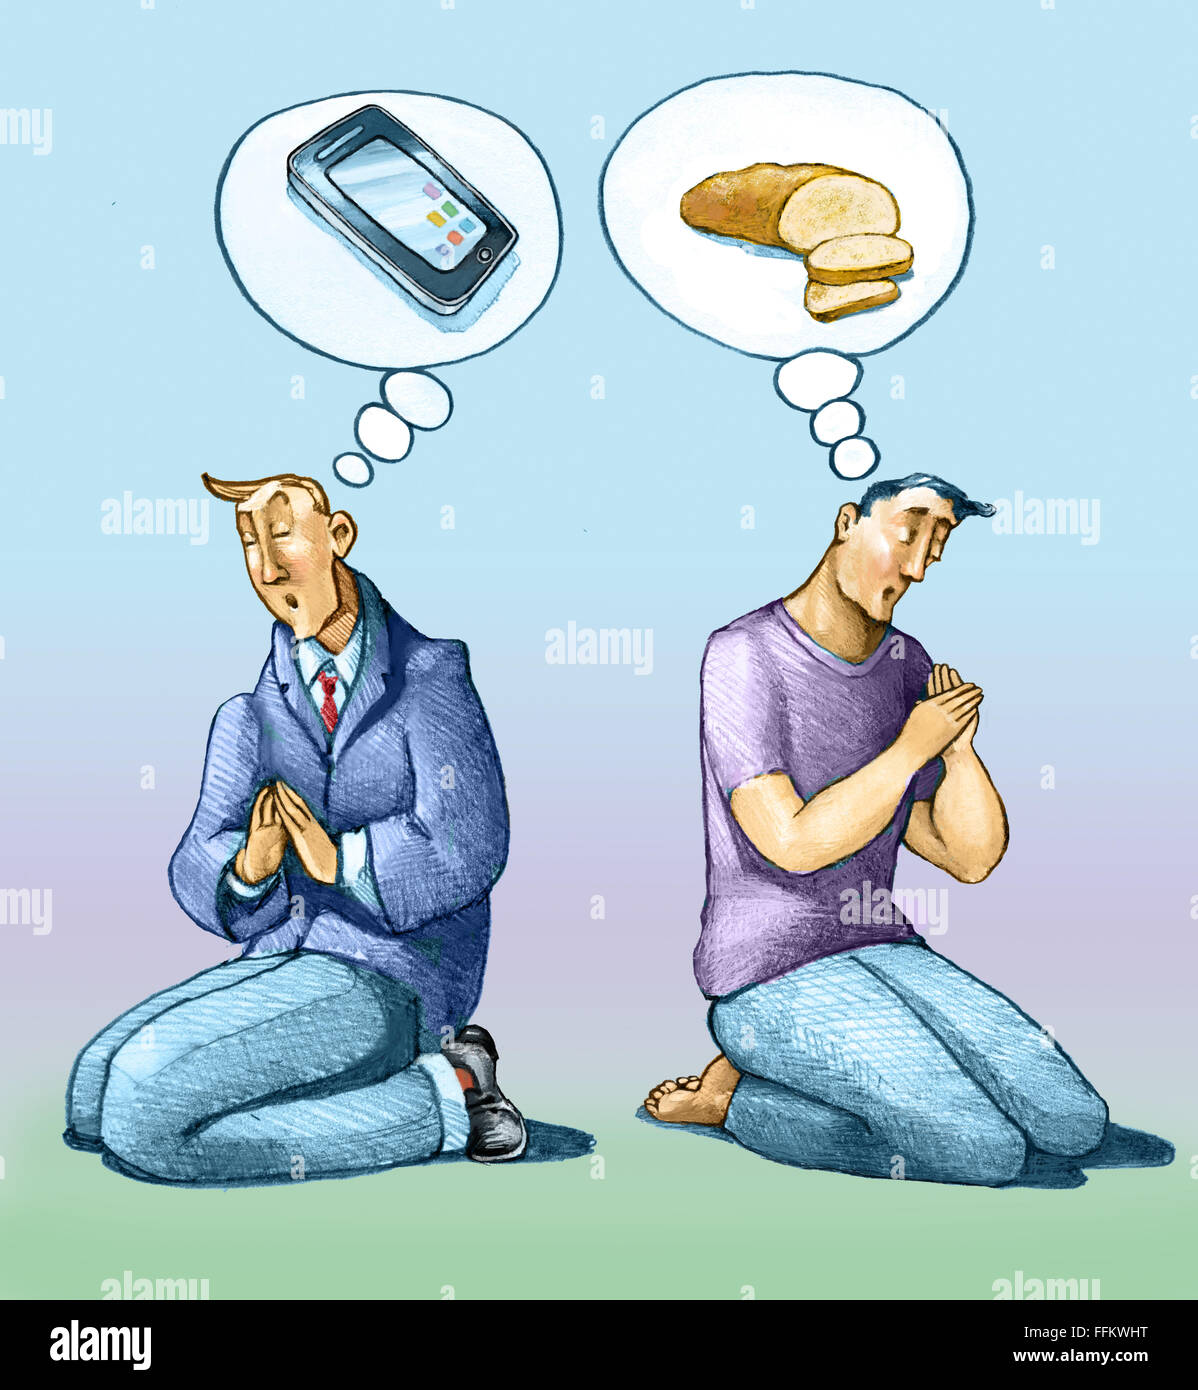 two men stylized different walks of life together to kneel and pray,  one dressed in suits dreams a smartphone, Stock Photo